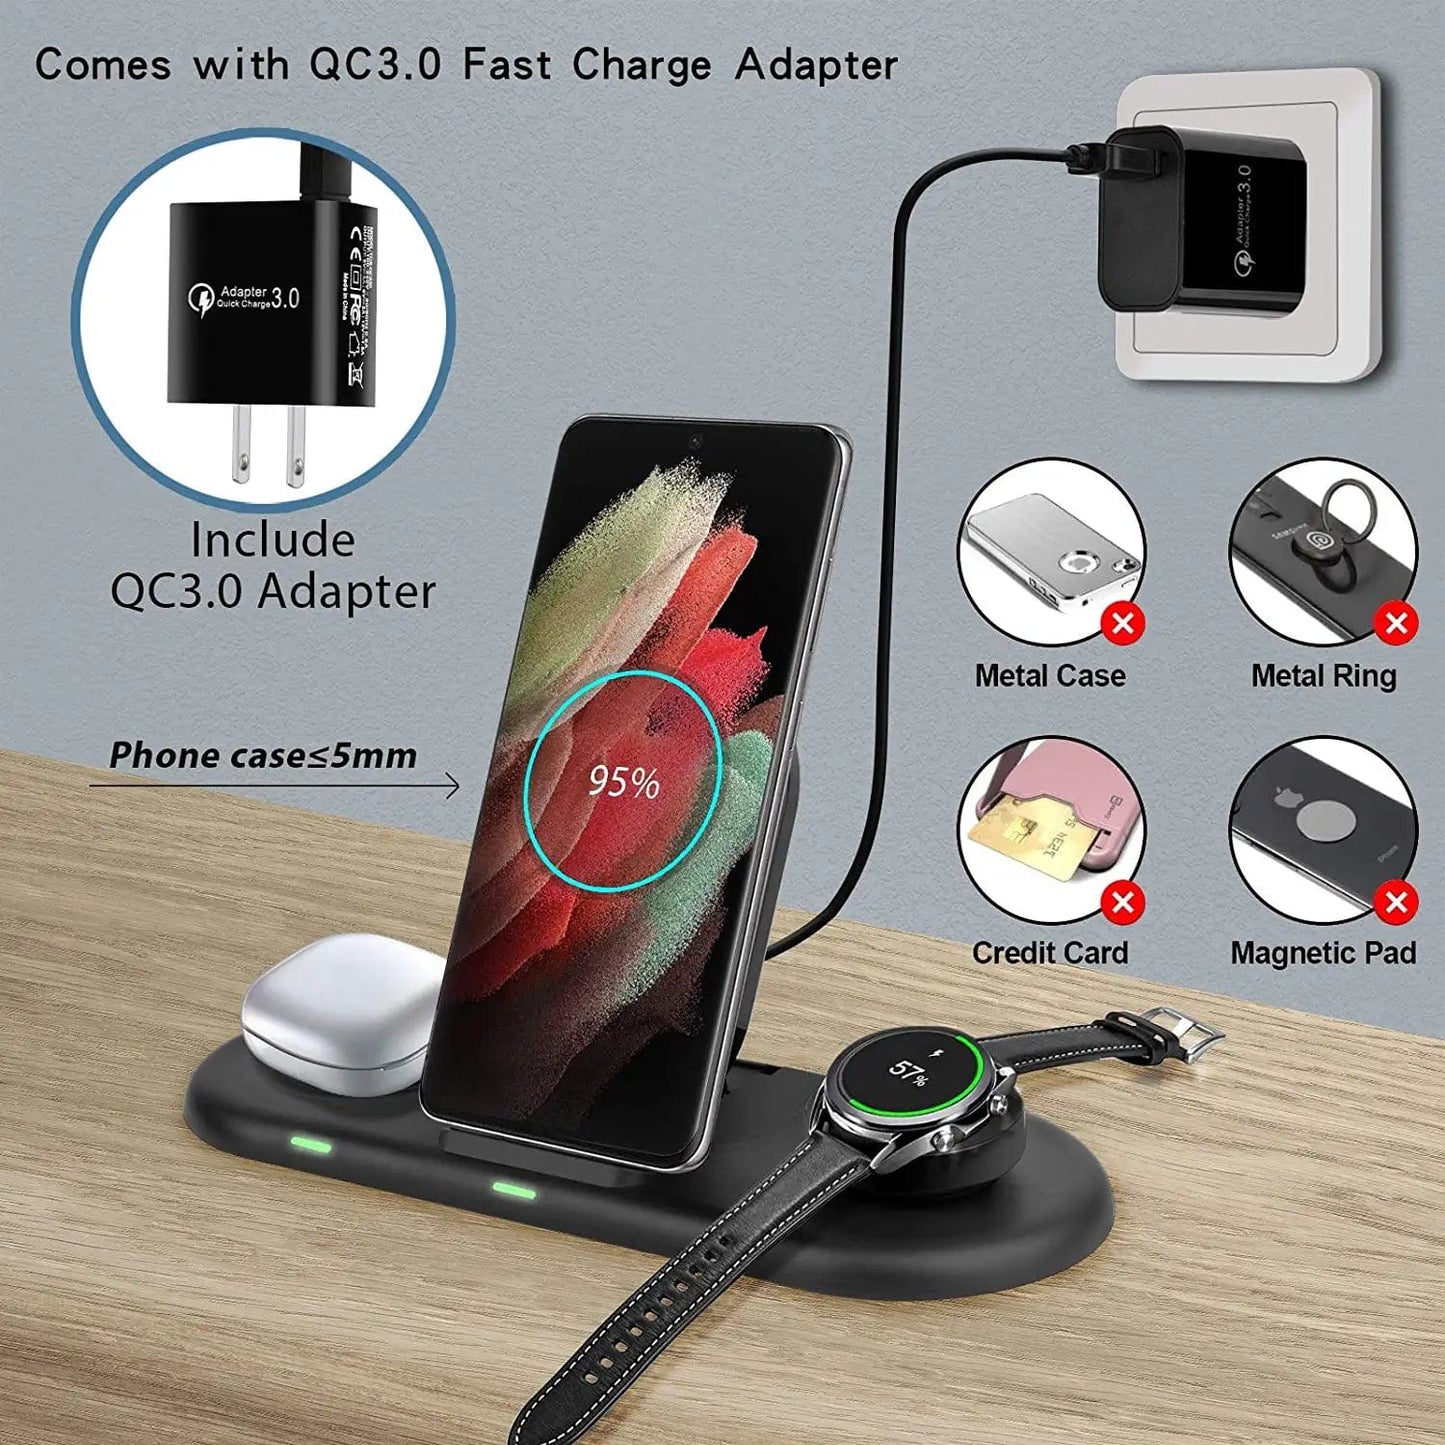 Wireless Charging Station 3 in 1, Fast Wireless Charger for Samsung Galaxy Watch 4, Active 2 Series and Galaxy Buds Series, Phone Charger Stand Dock Compatible with Samsung Galaxy S22 S20 Note(Black)